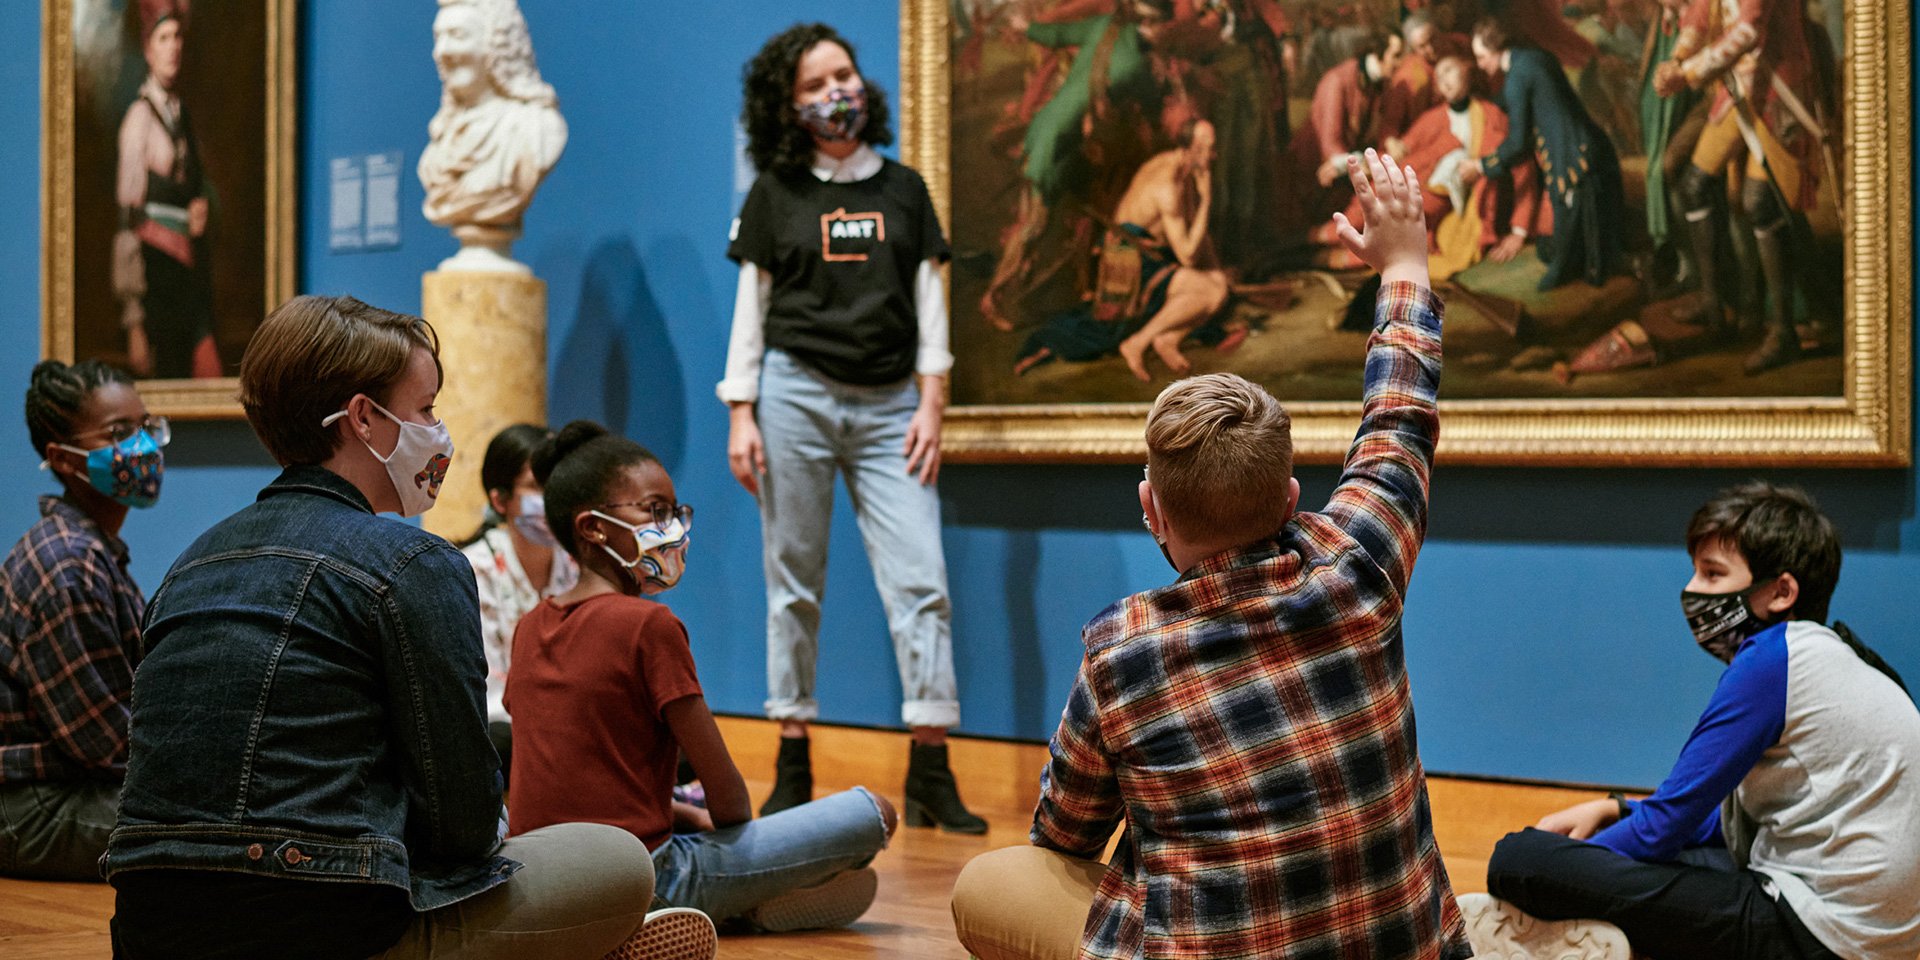 Students sitting on the ground in front of artworks.